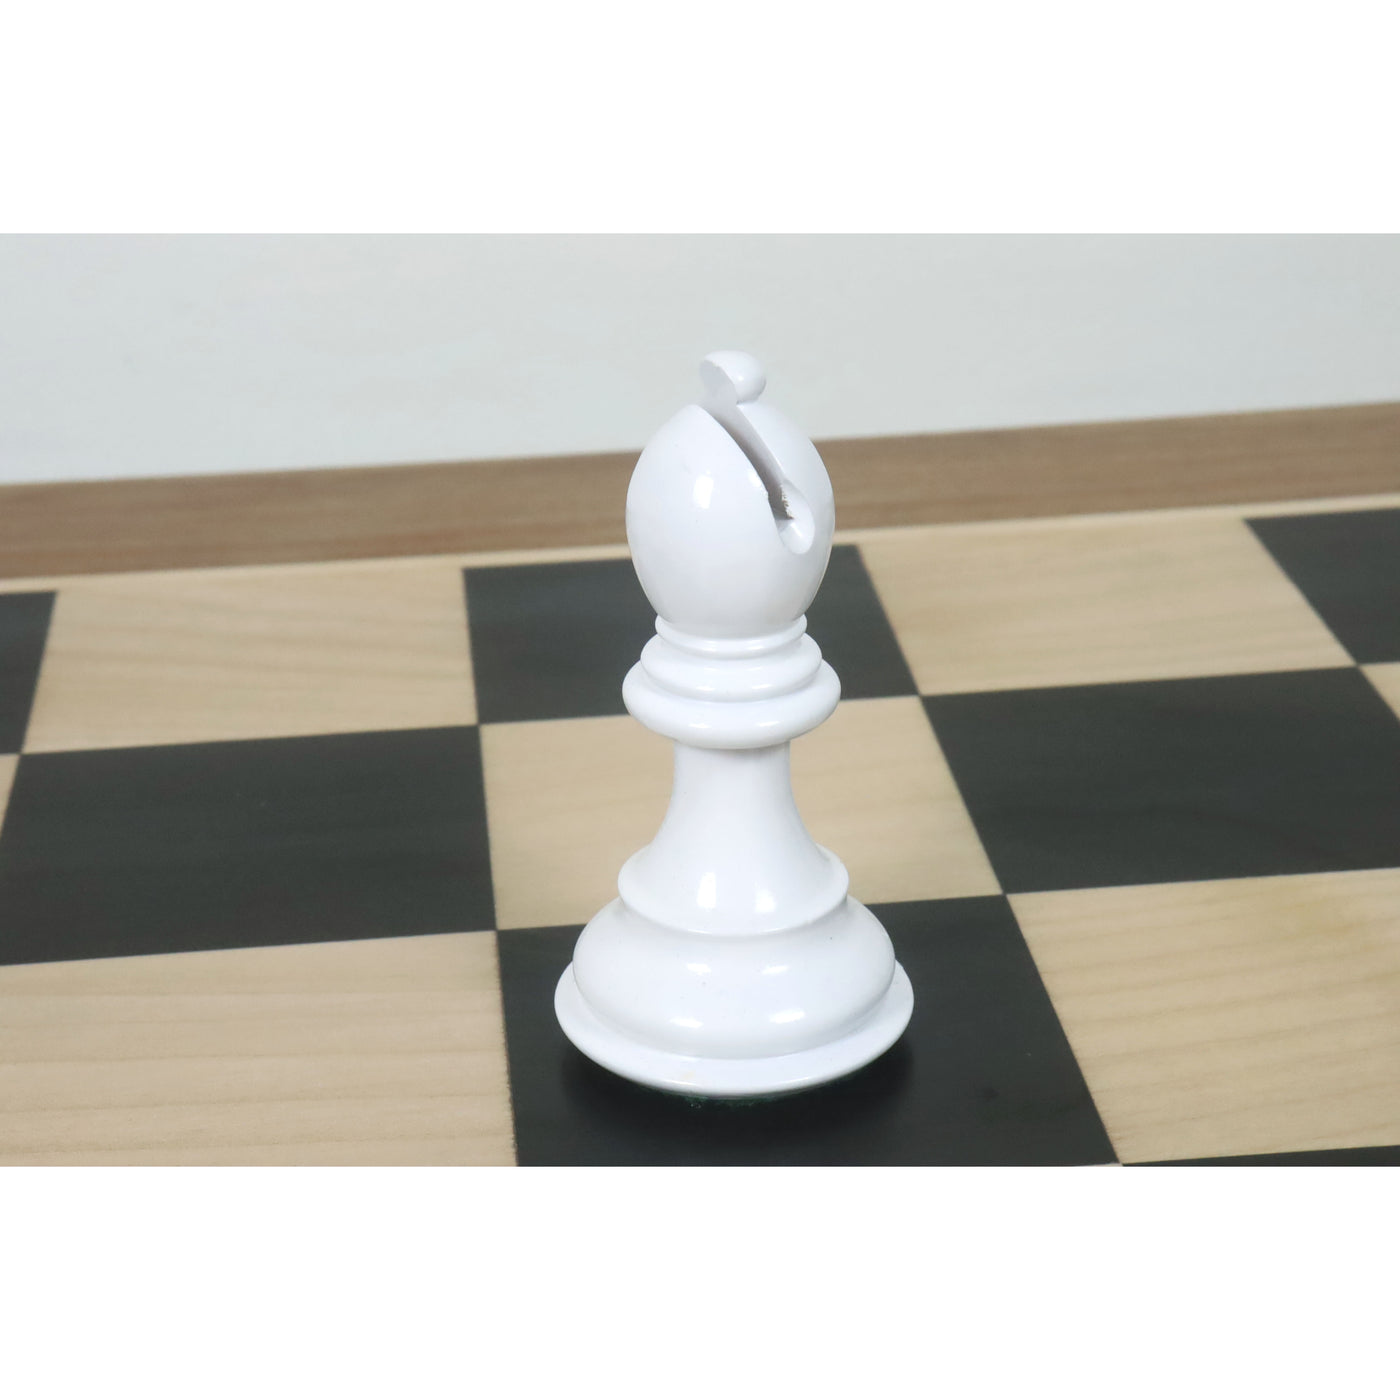 Pro Staunton Black & White Lacquered Wooden Chess Pieces Only Set